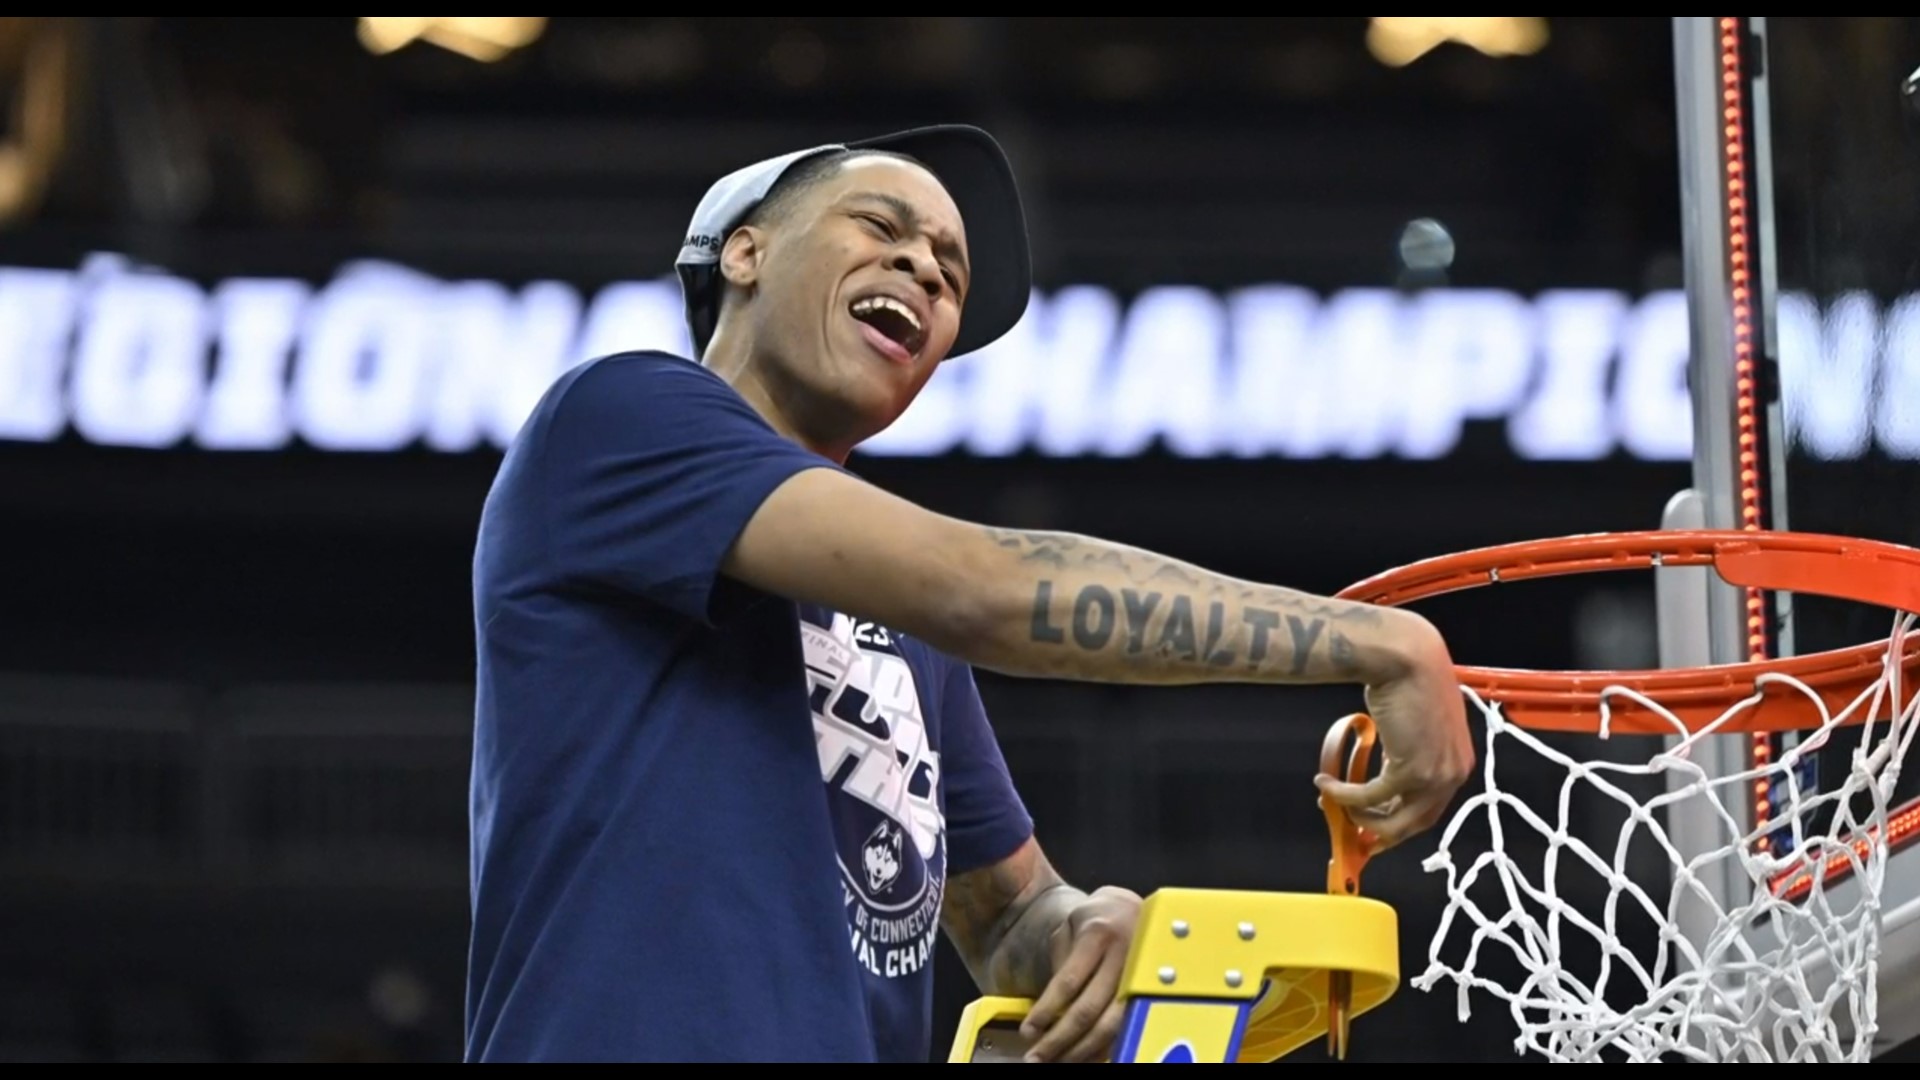 UConn key player Jordan Hawkins says his bout with a stomach bug before Saturday's Final Four game will not be a factor during Monday night's Championship game.